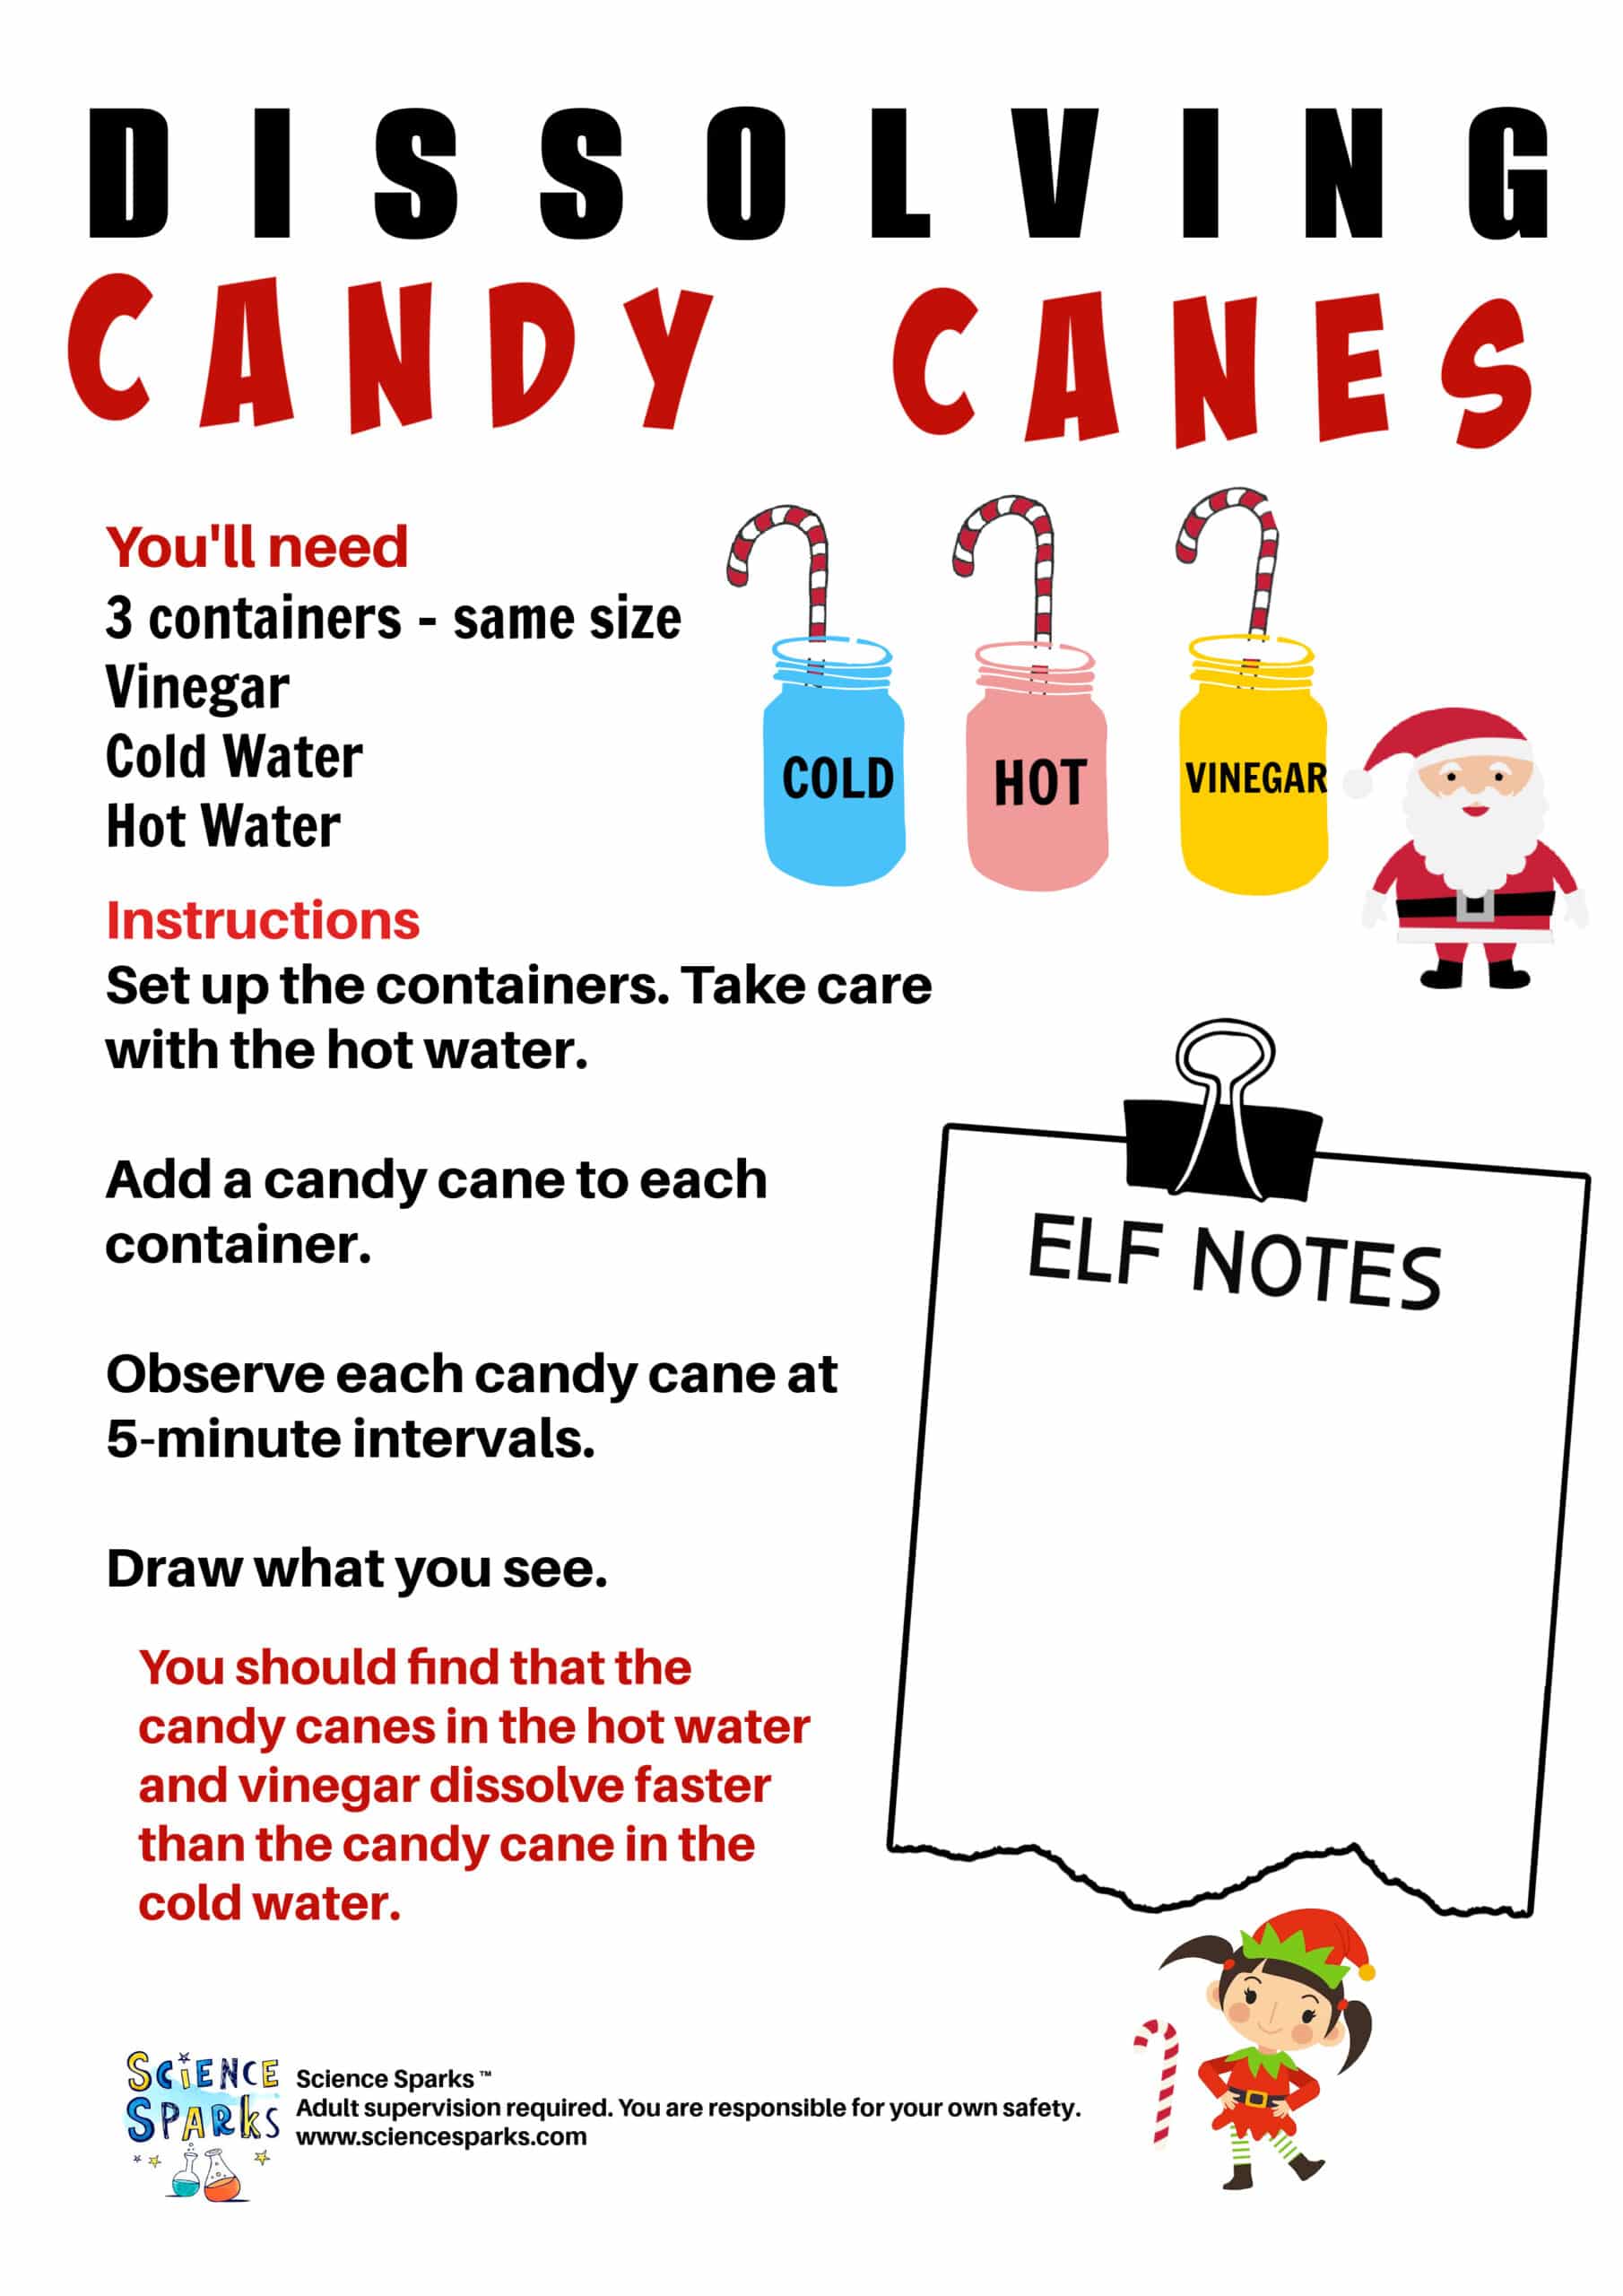 https://www.science-sparks.com/wp-content/uploads/2013/12/Elf-Experiments-dissolving-Candy-Canes-investigation-instructions-1-scaled.jpg